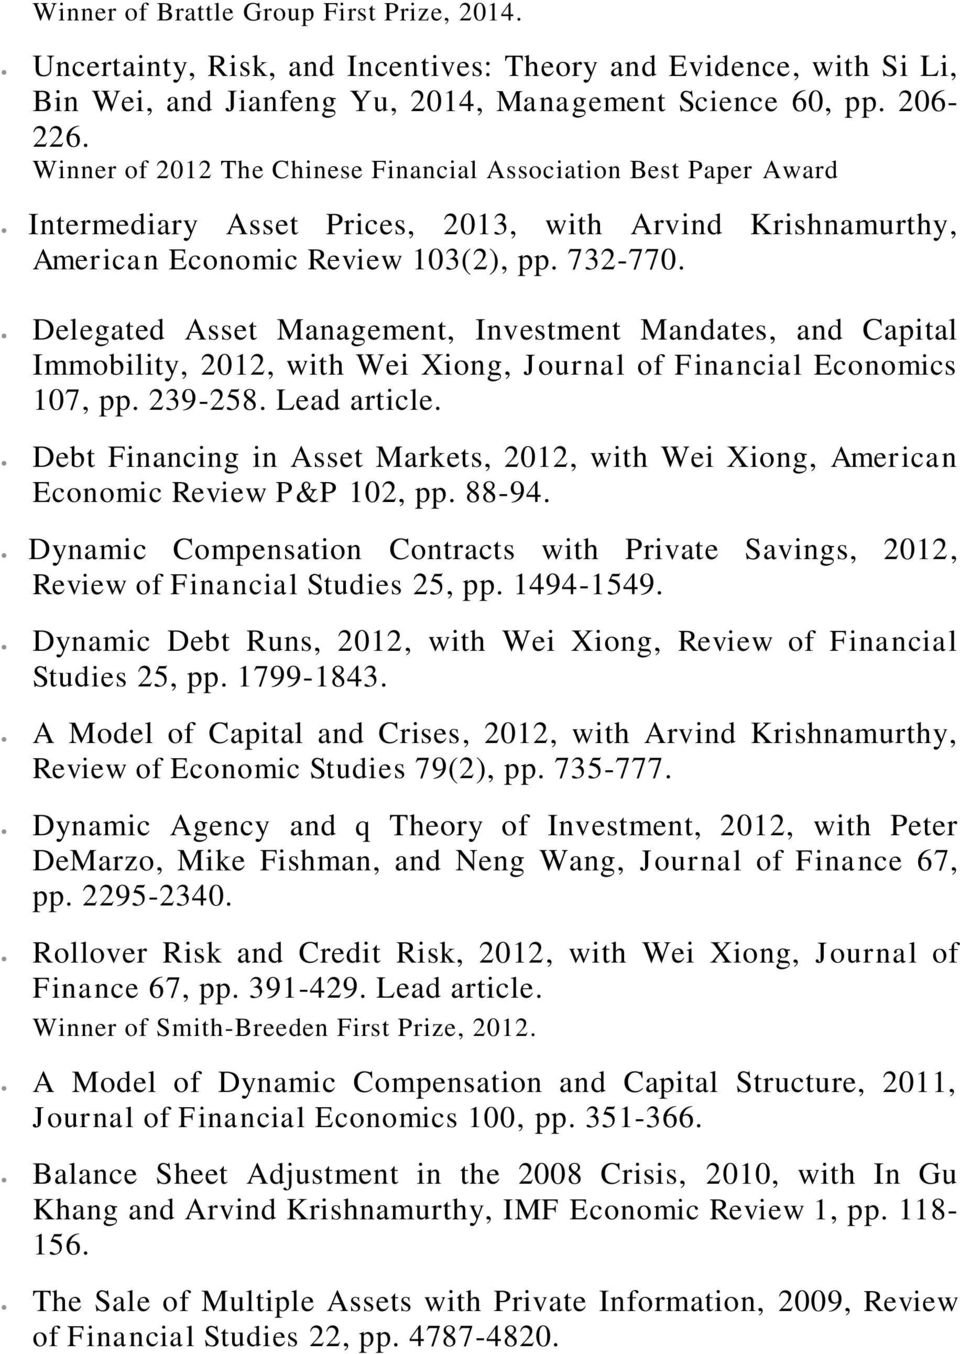 Delegated Asset Management, Investment Mandates, and Capital Immobility, 2012, with Wei Xiong, Journal of Financial Economics 107, pp. 239-258. Lead article.